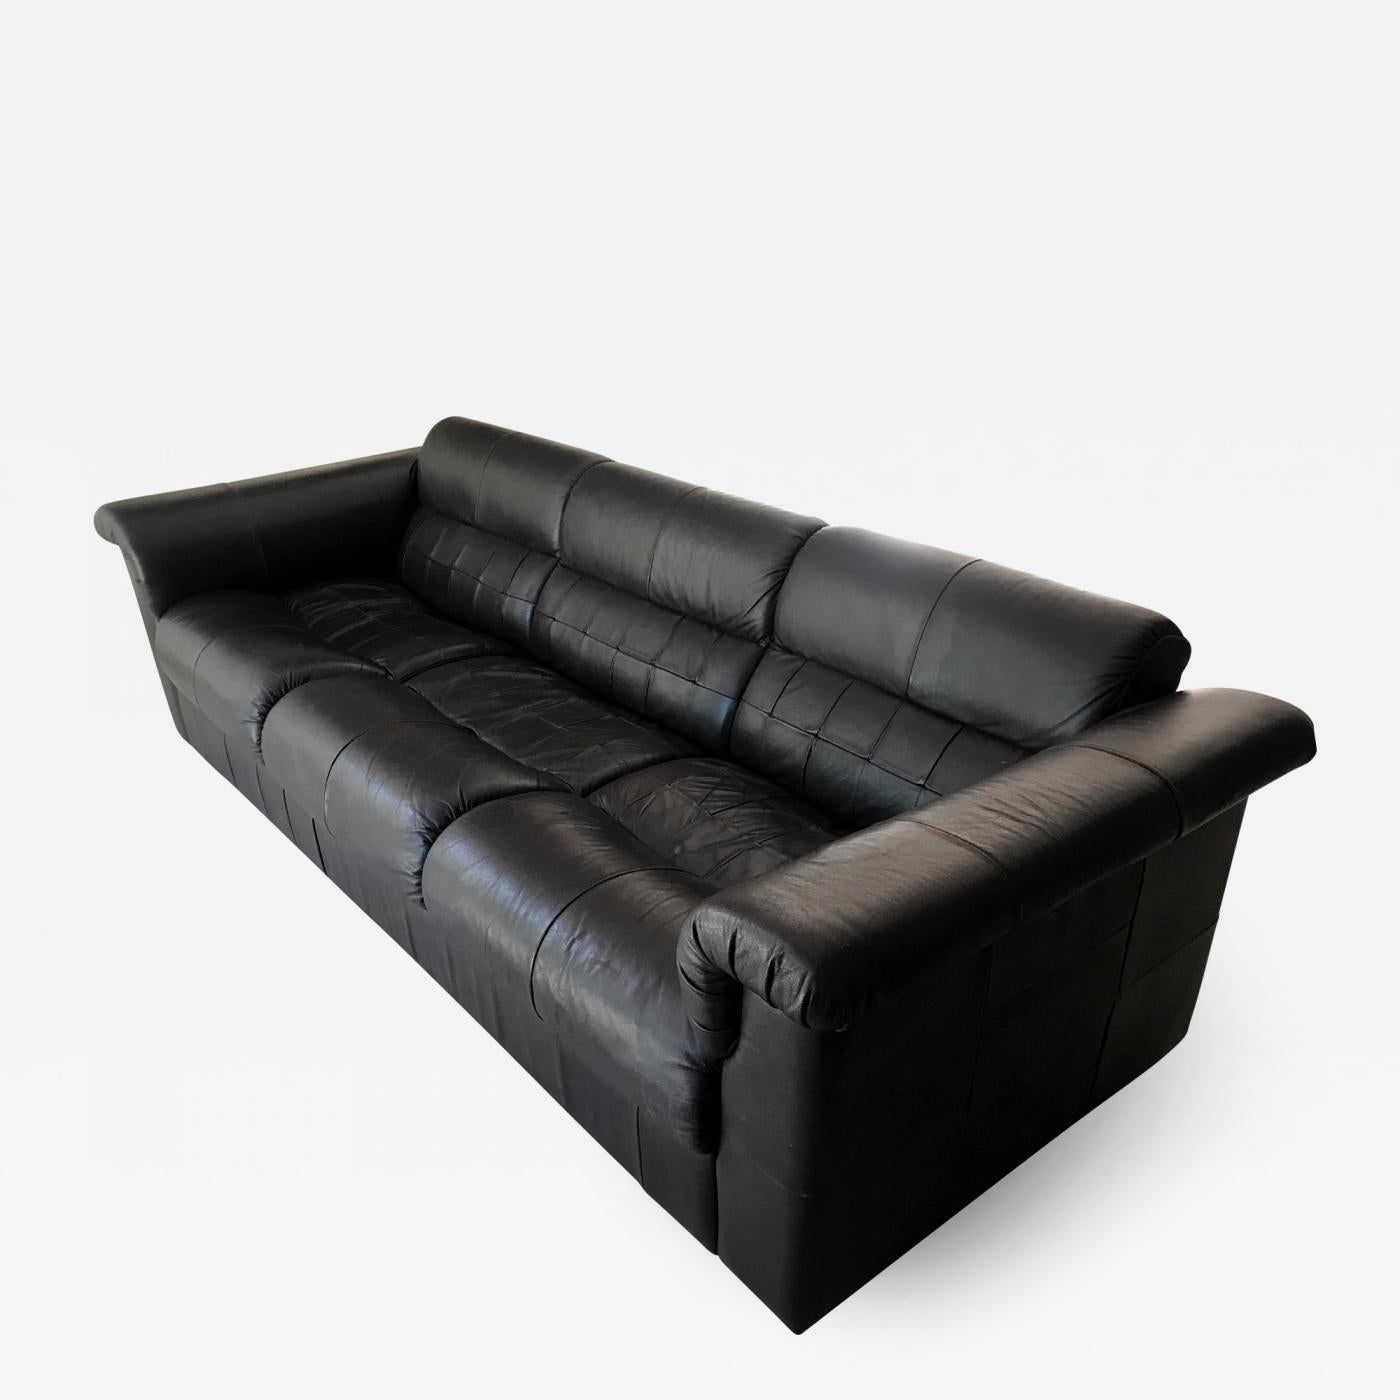 A three-seat armed sofa by Percival Lafer, made in Brazil circa 1970s. Wood frame with complete leather cover. The sofa was constructed as a modular pieces for easy dissemble and assemble. The seats and arms can be taken off individually for